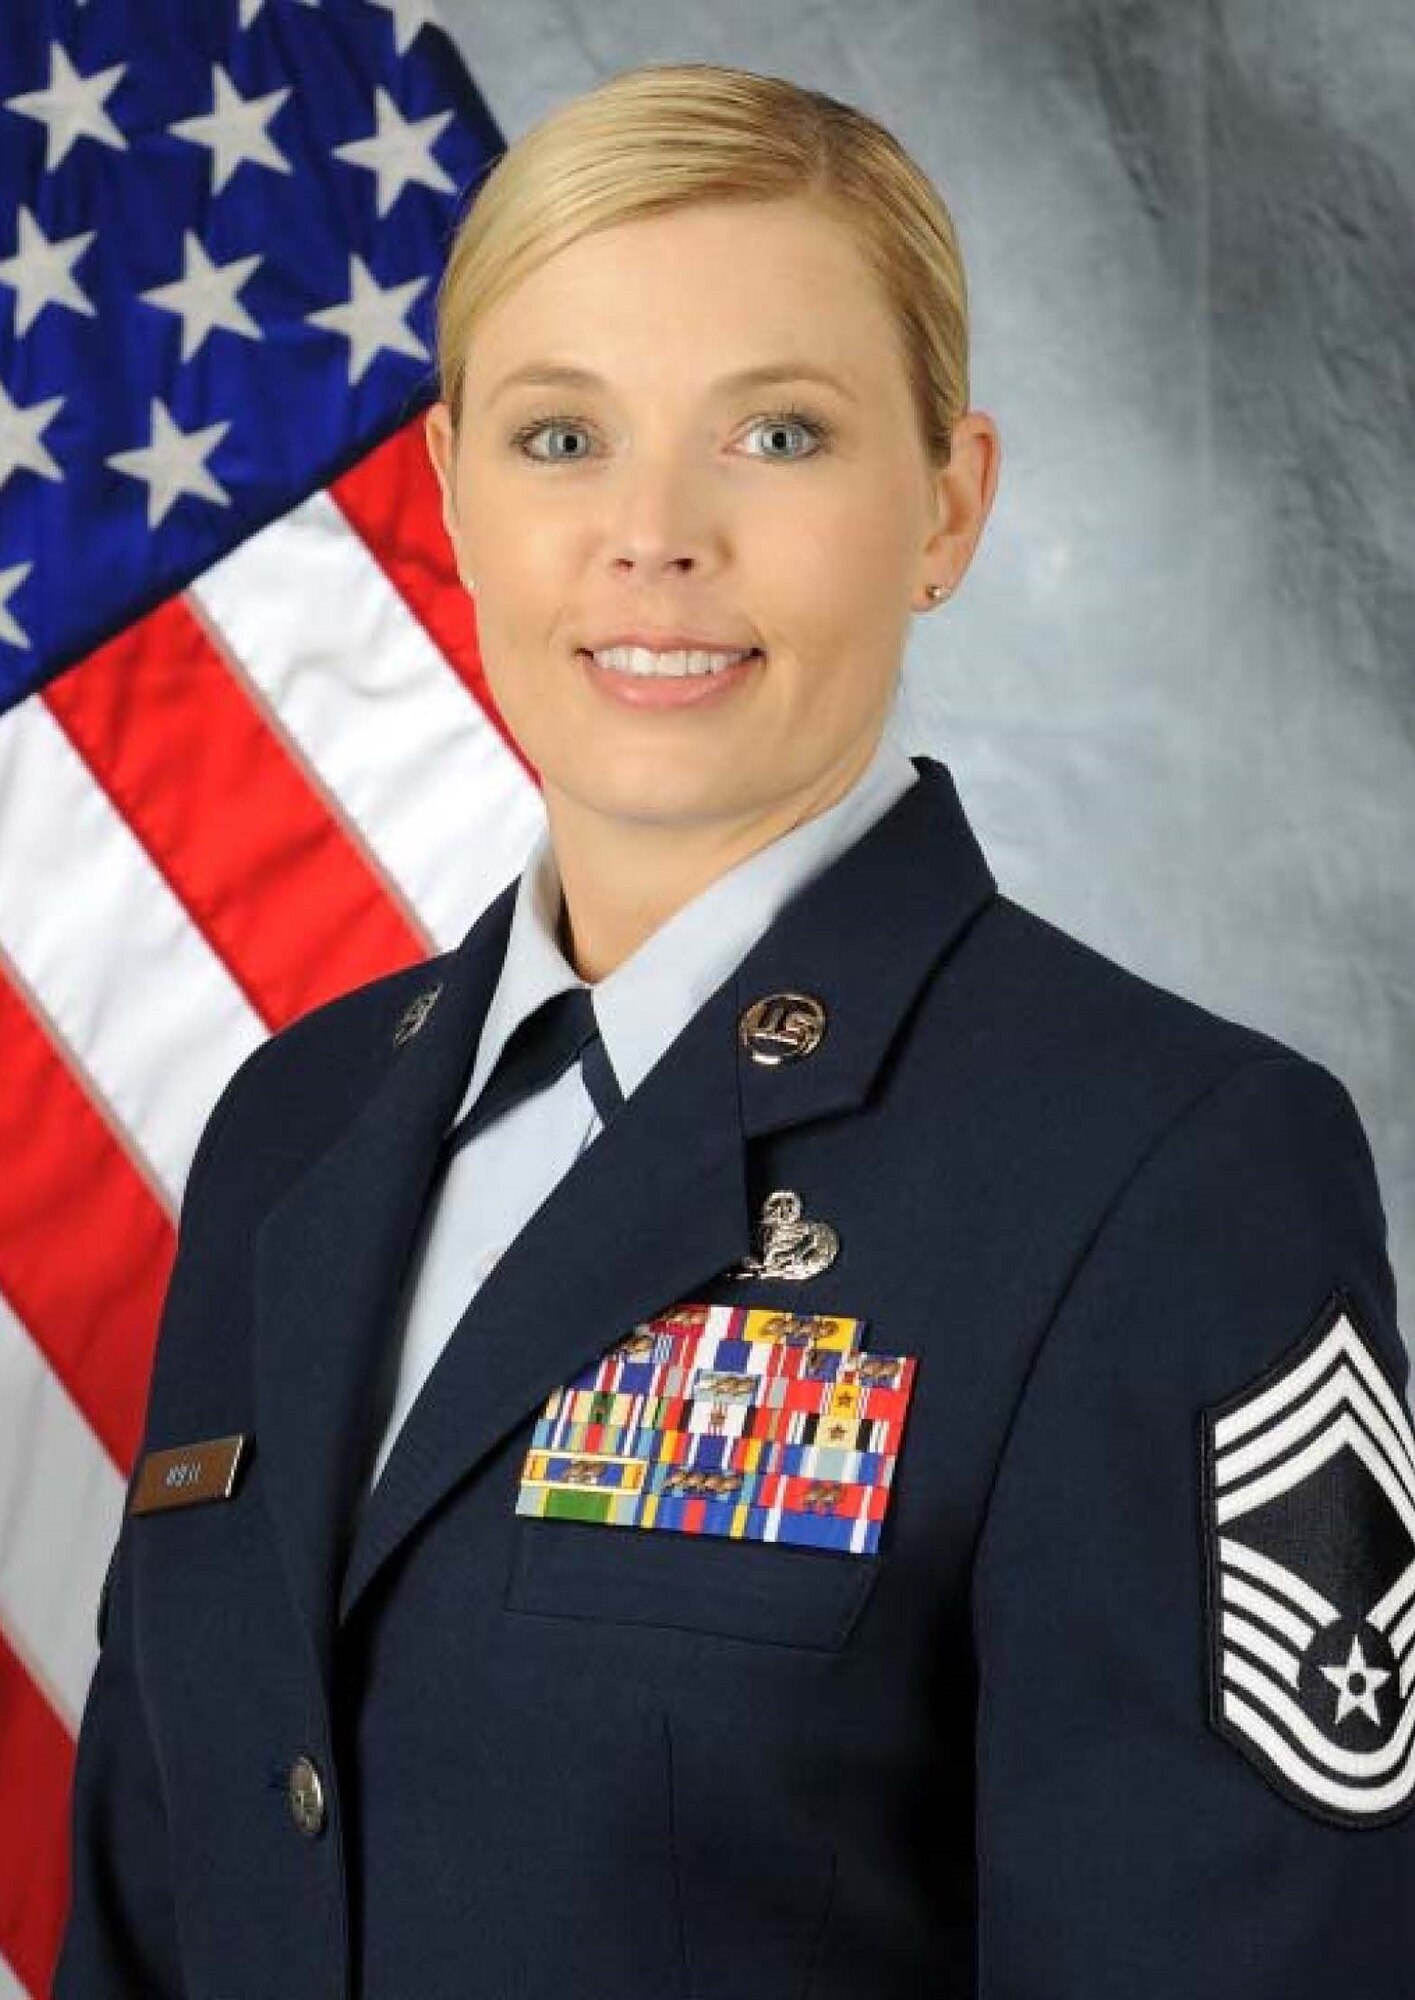 Commentary by Chief Master Sgt. Erika Scofield, 60th Mission Support Group